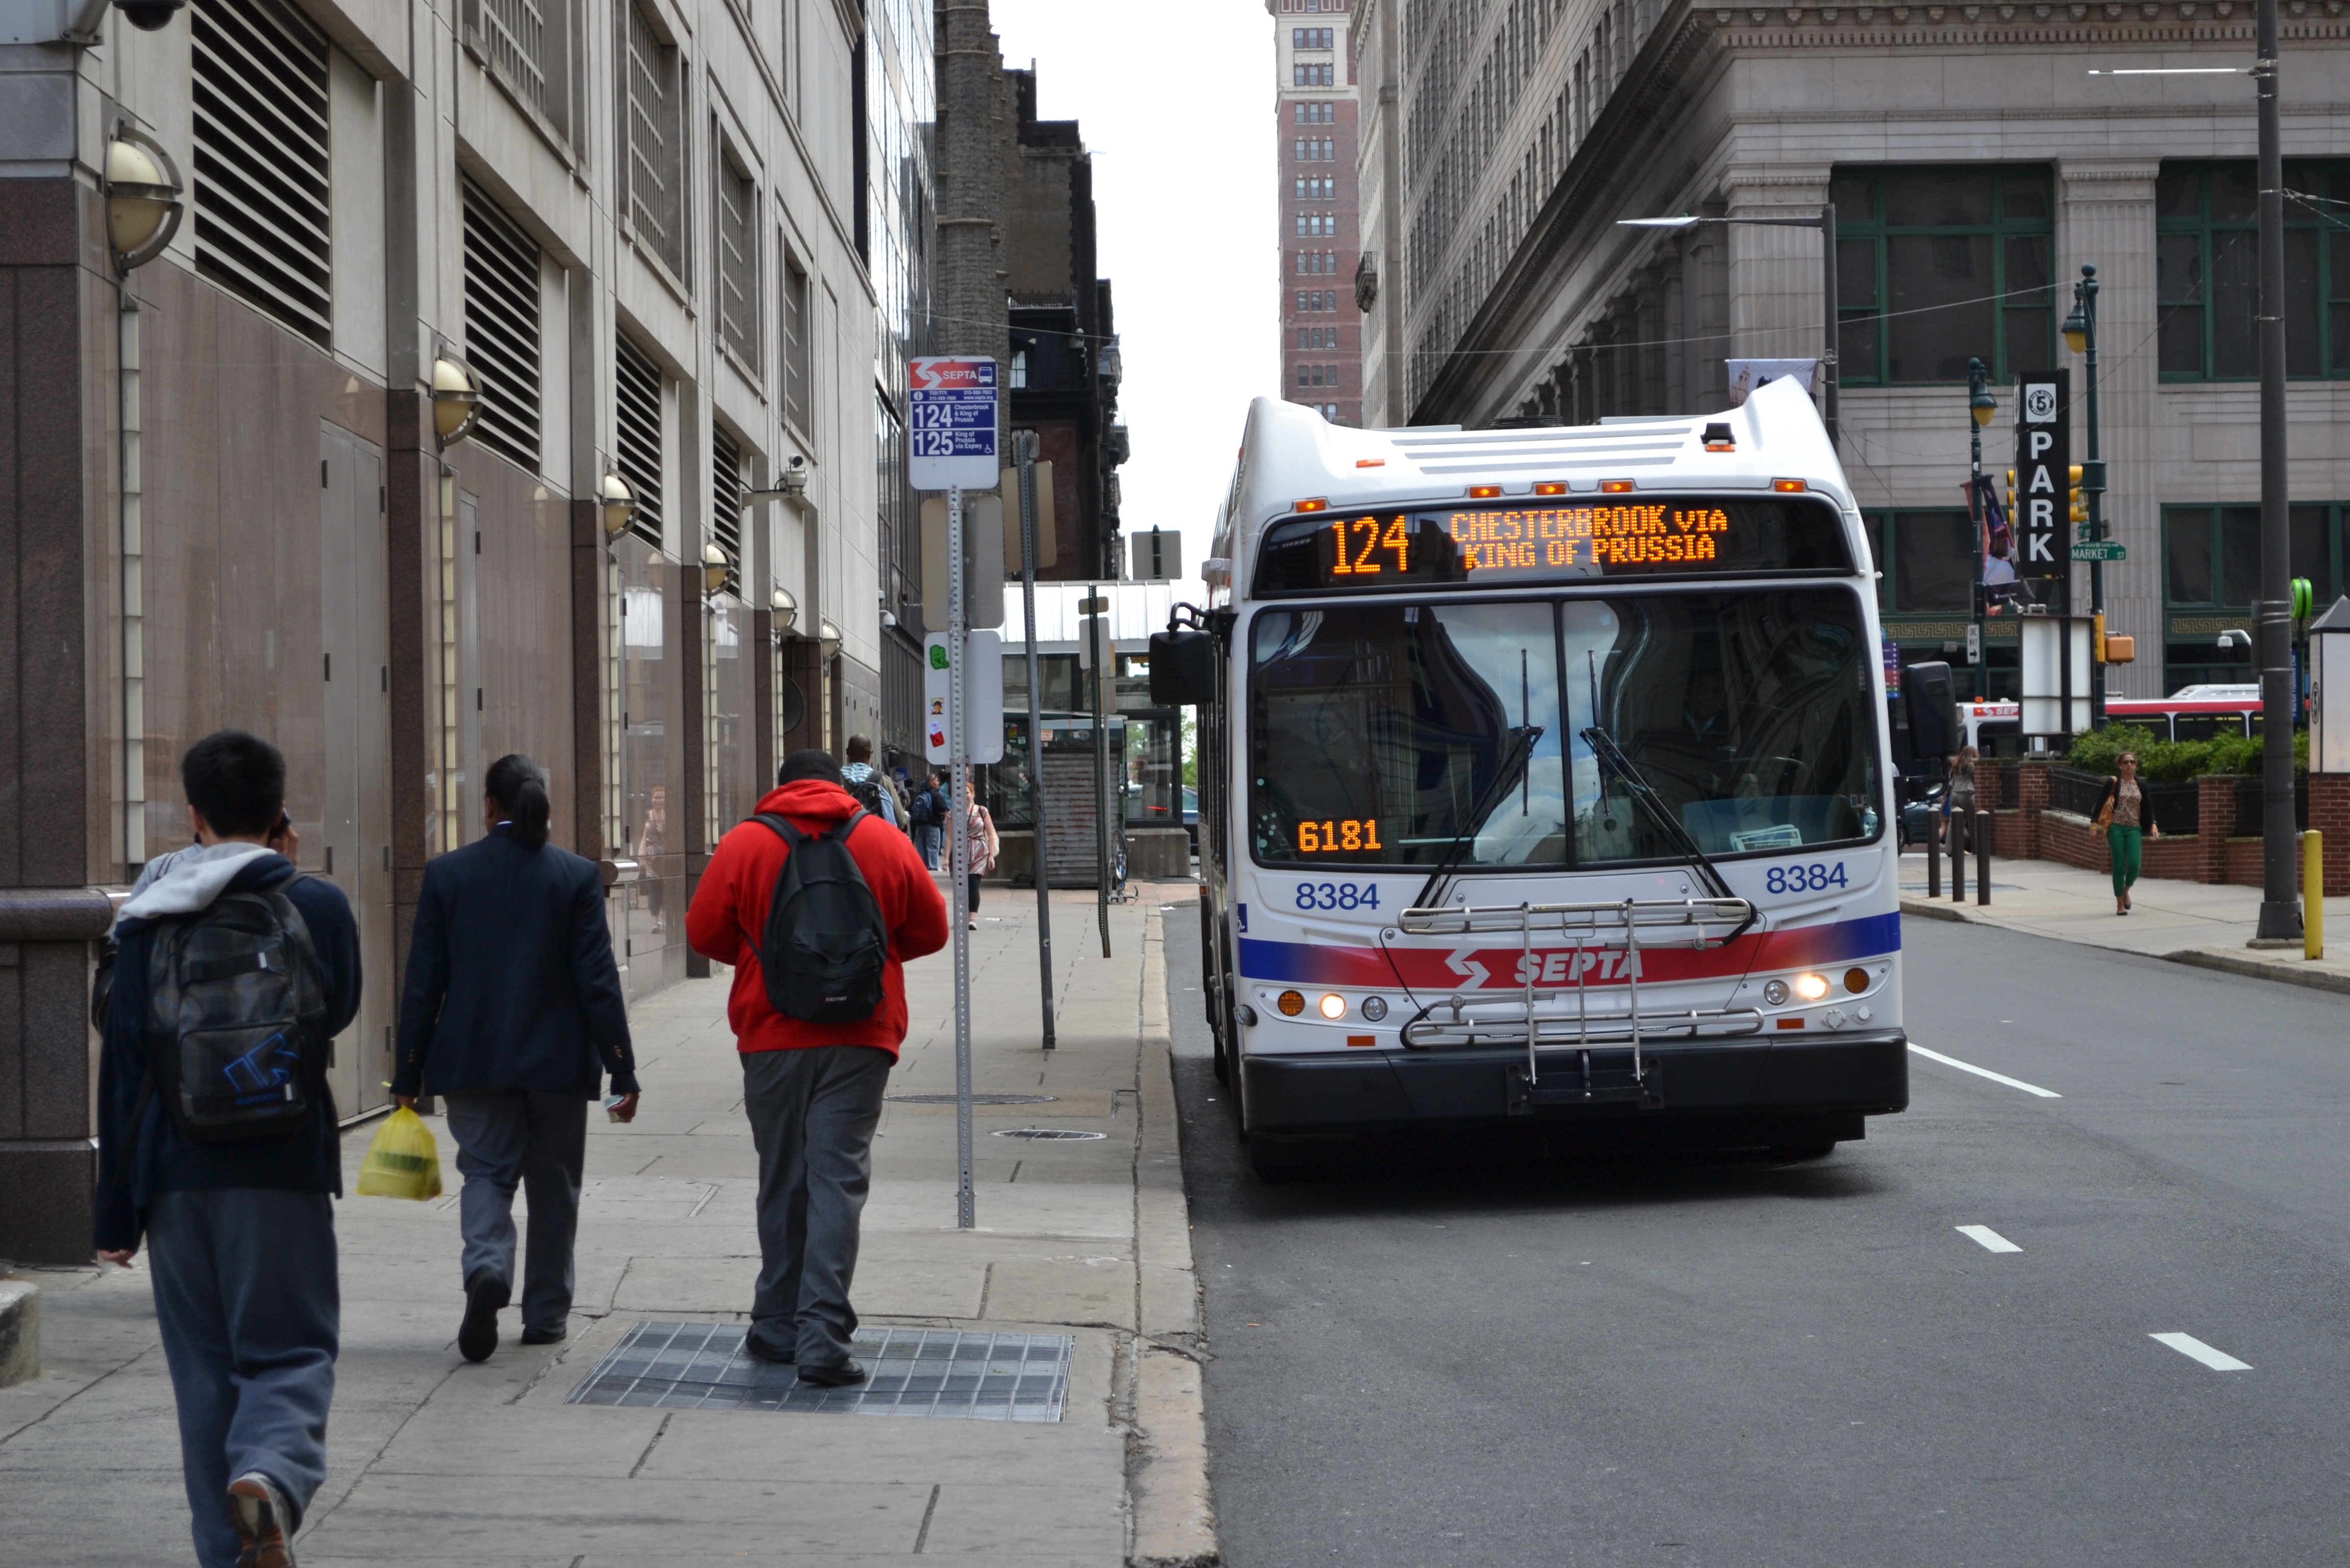 SEPTA approves one-month budget, waits for word from state